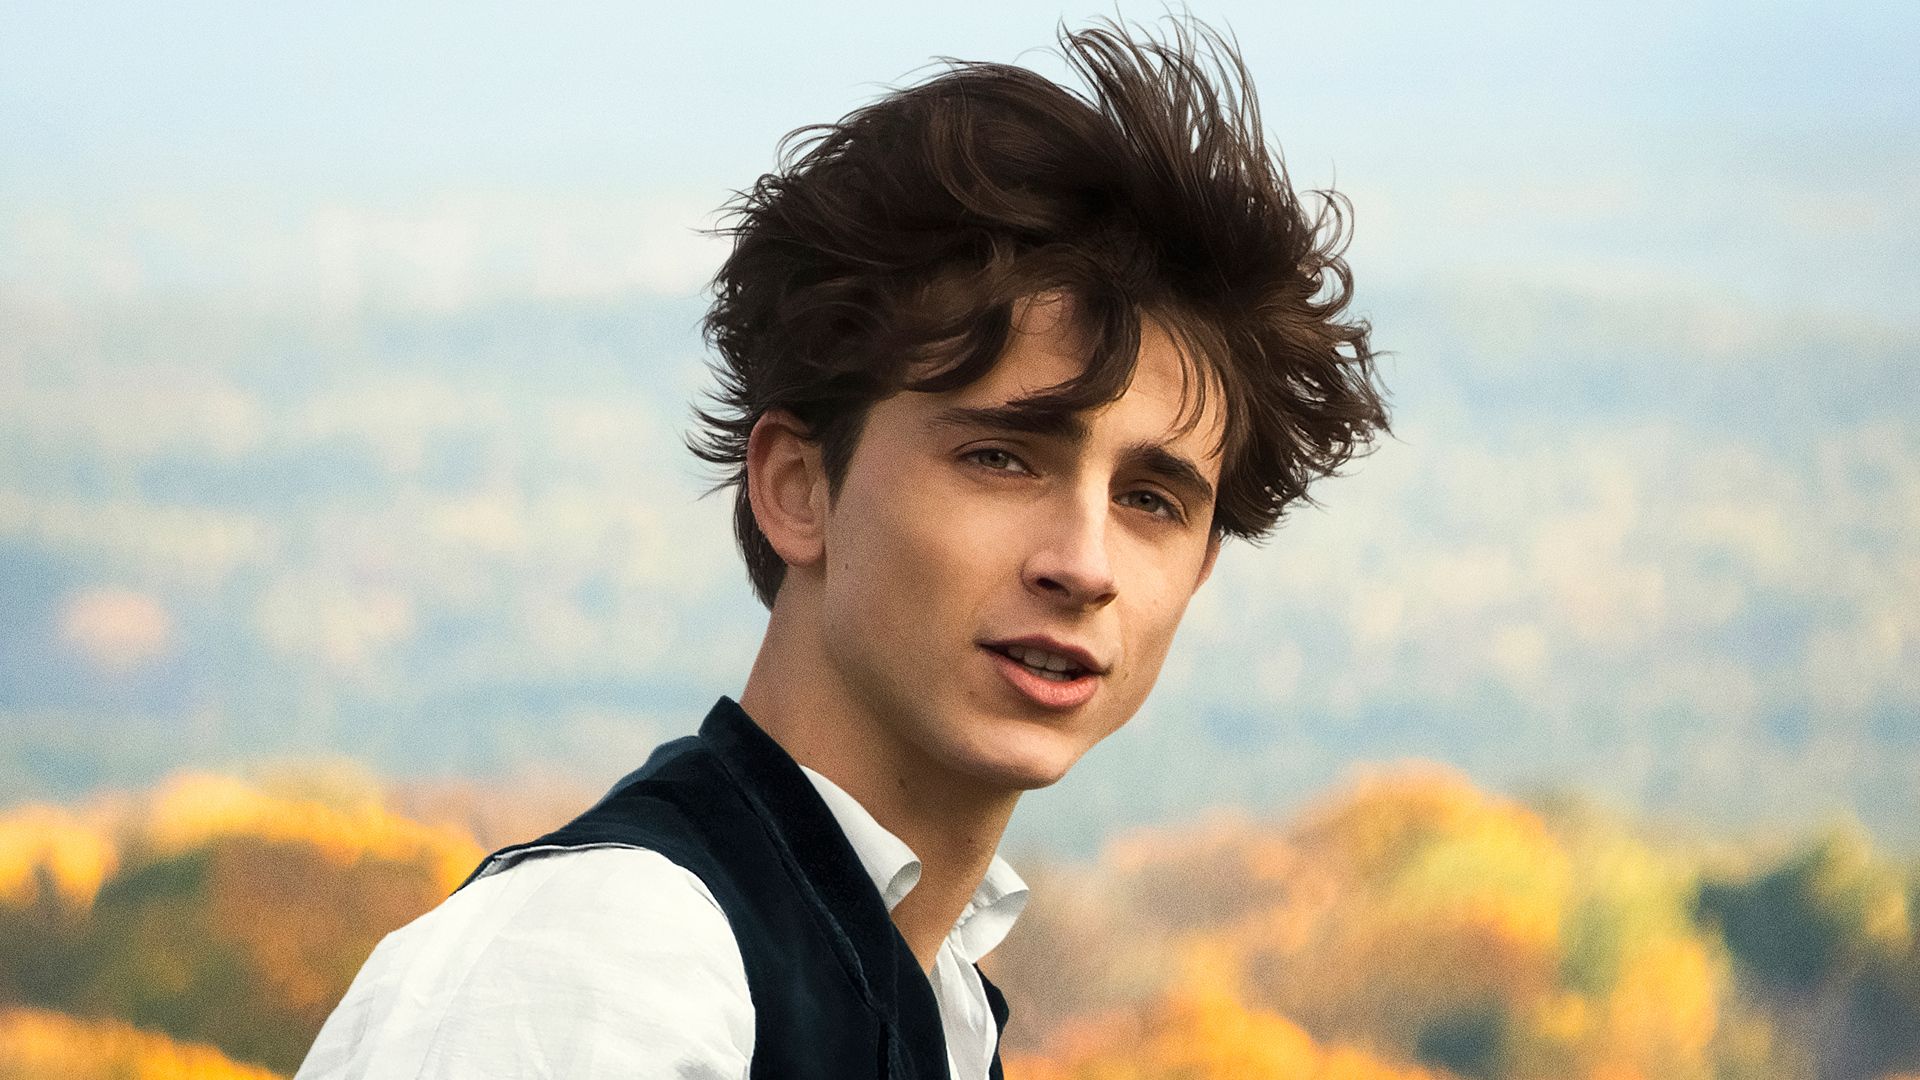 Timothee Chalamet In Little Women Laptop Full HD 1080P HD 4k Wallpaper, Image, Background, Photo and Picture